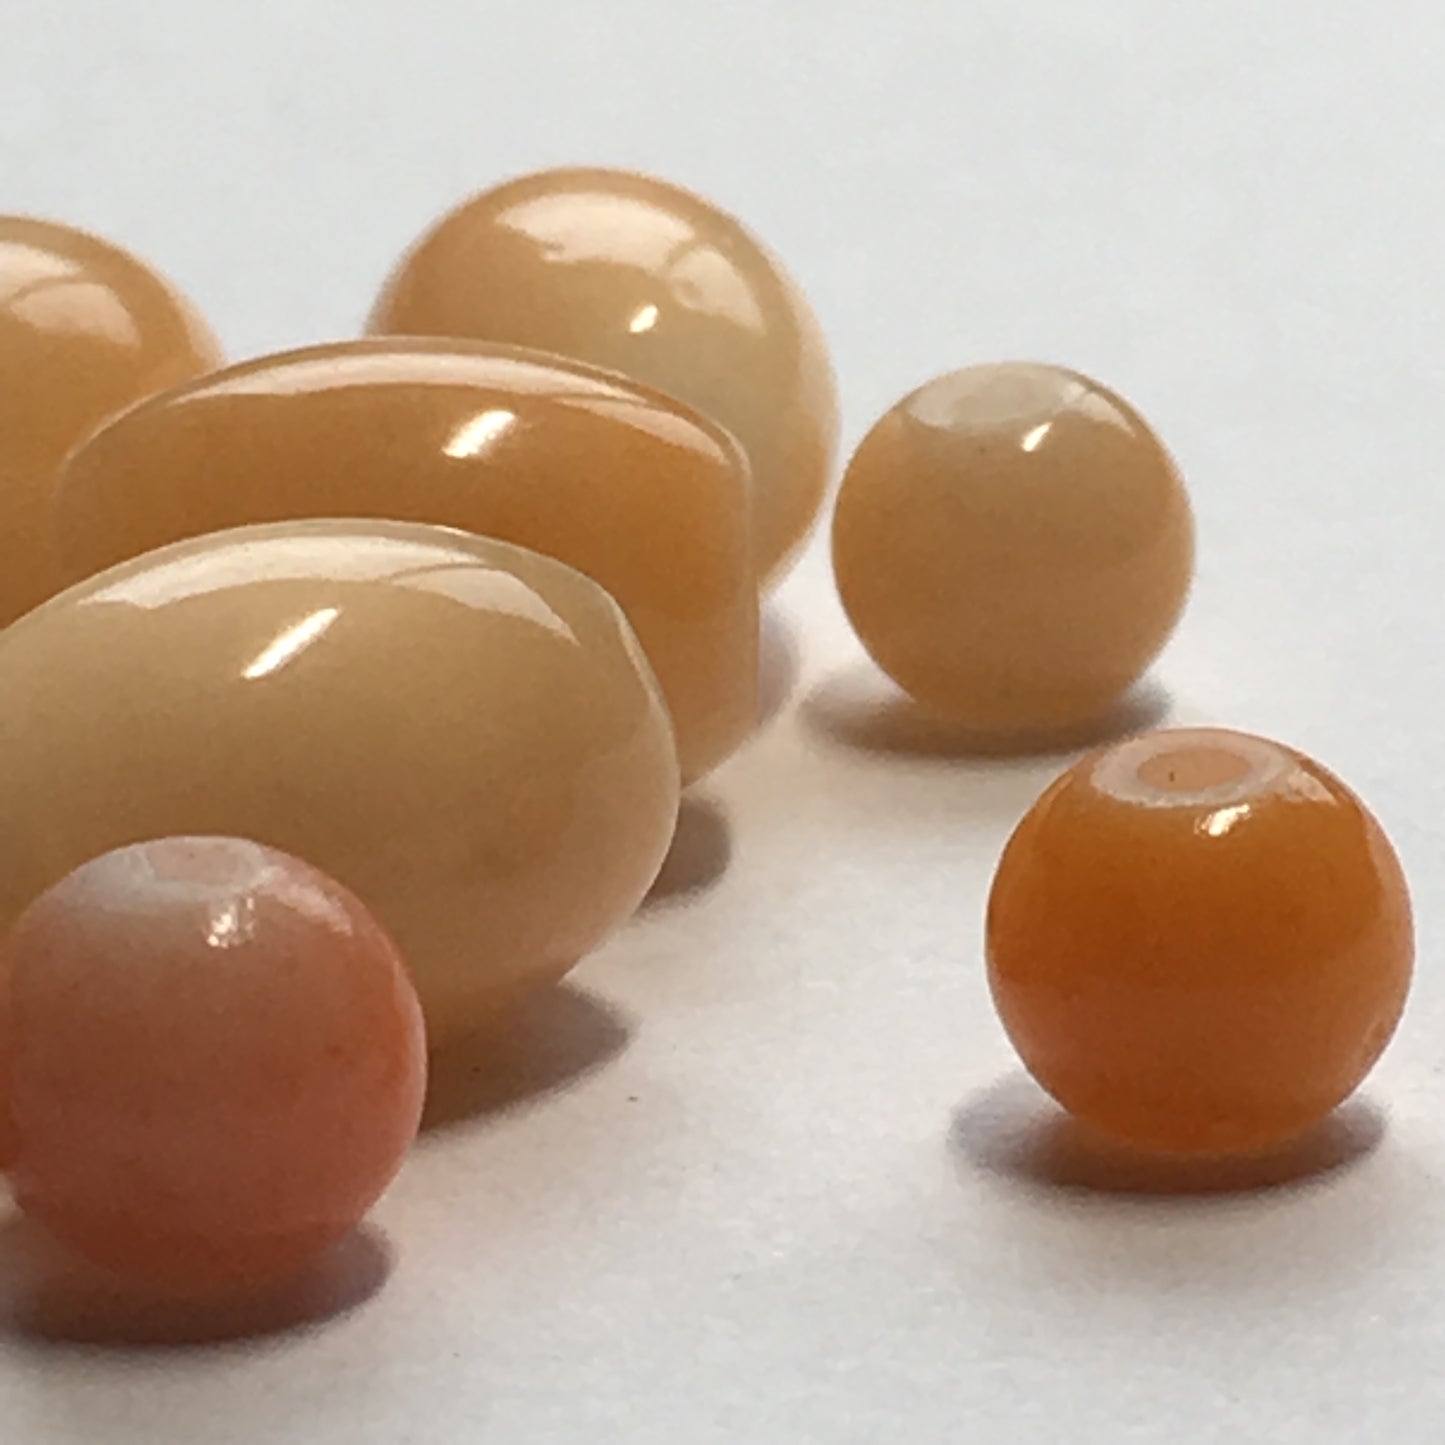 Light Orange Painted Glass Barrel and Round Beads, 11 x 8 mm Barrel, 6 & 8 mm Round, 17 Beads